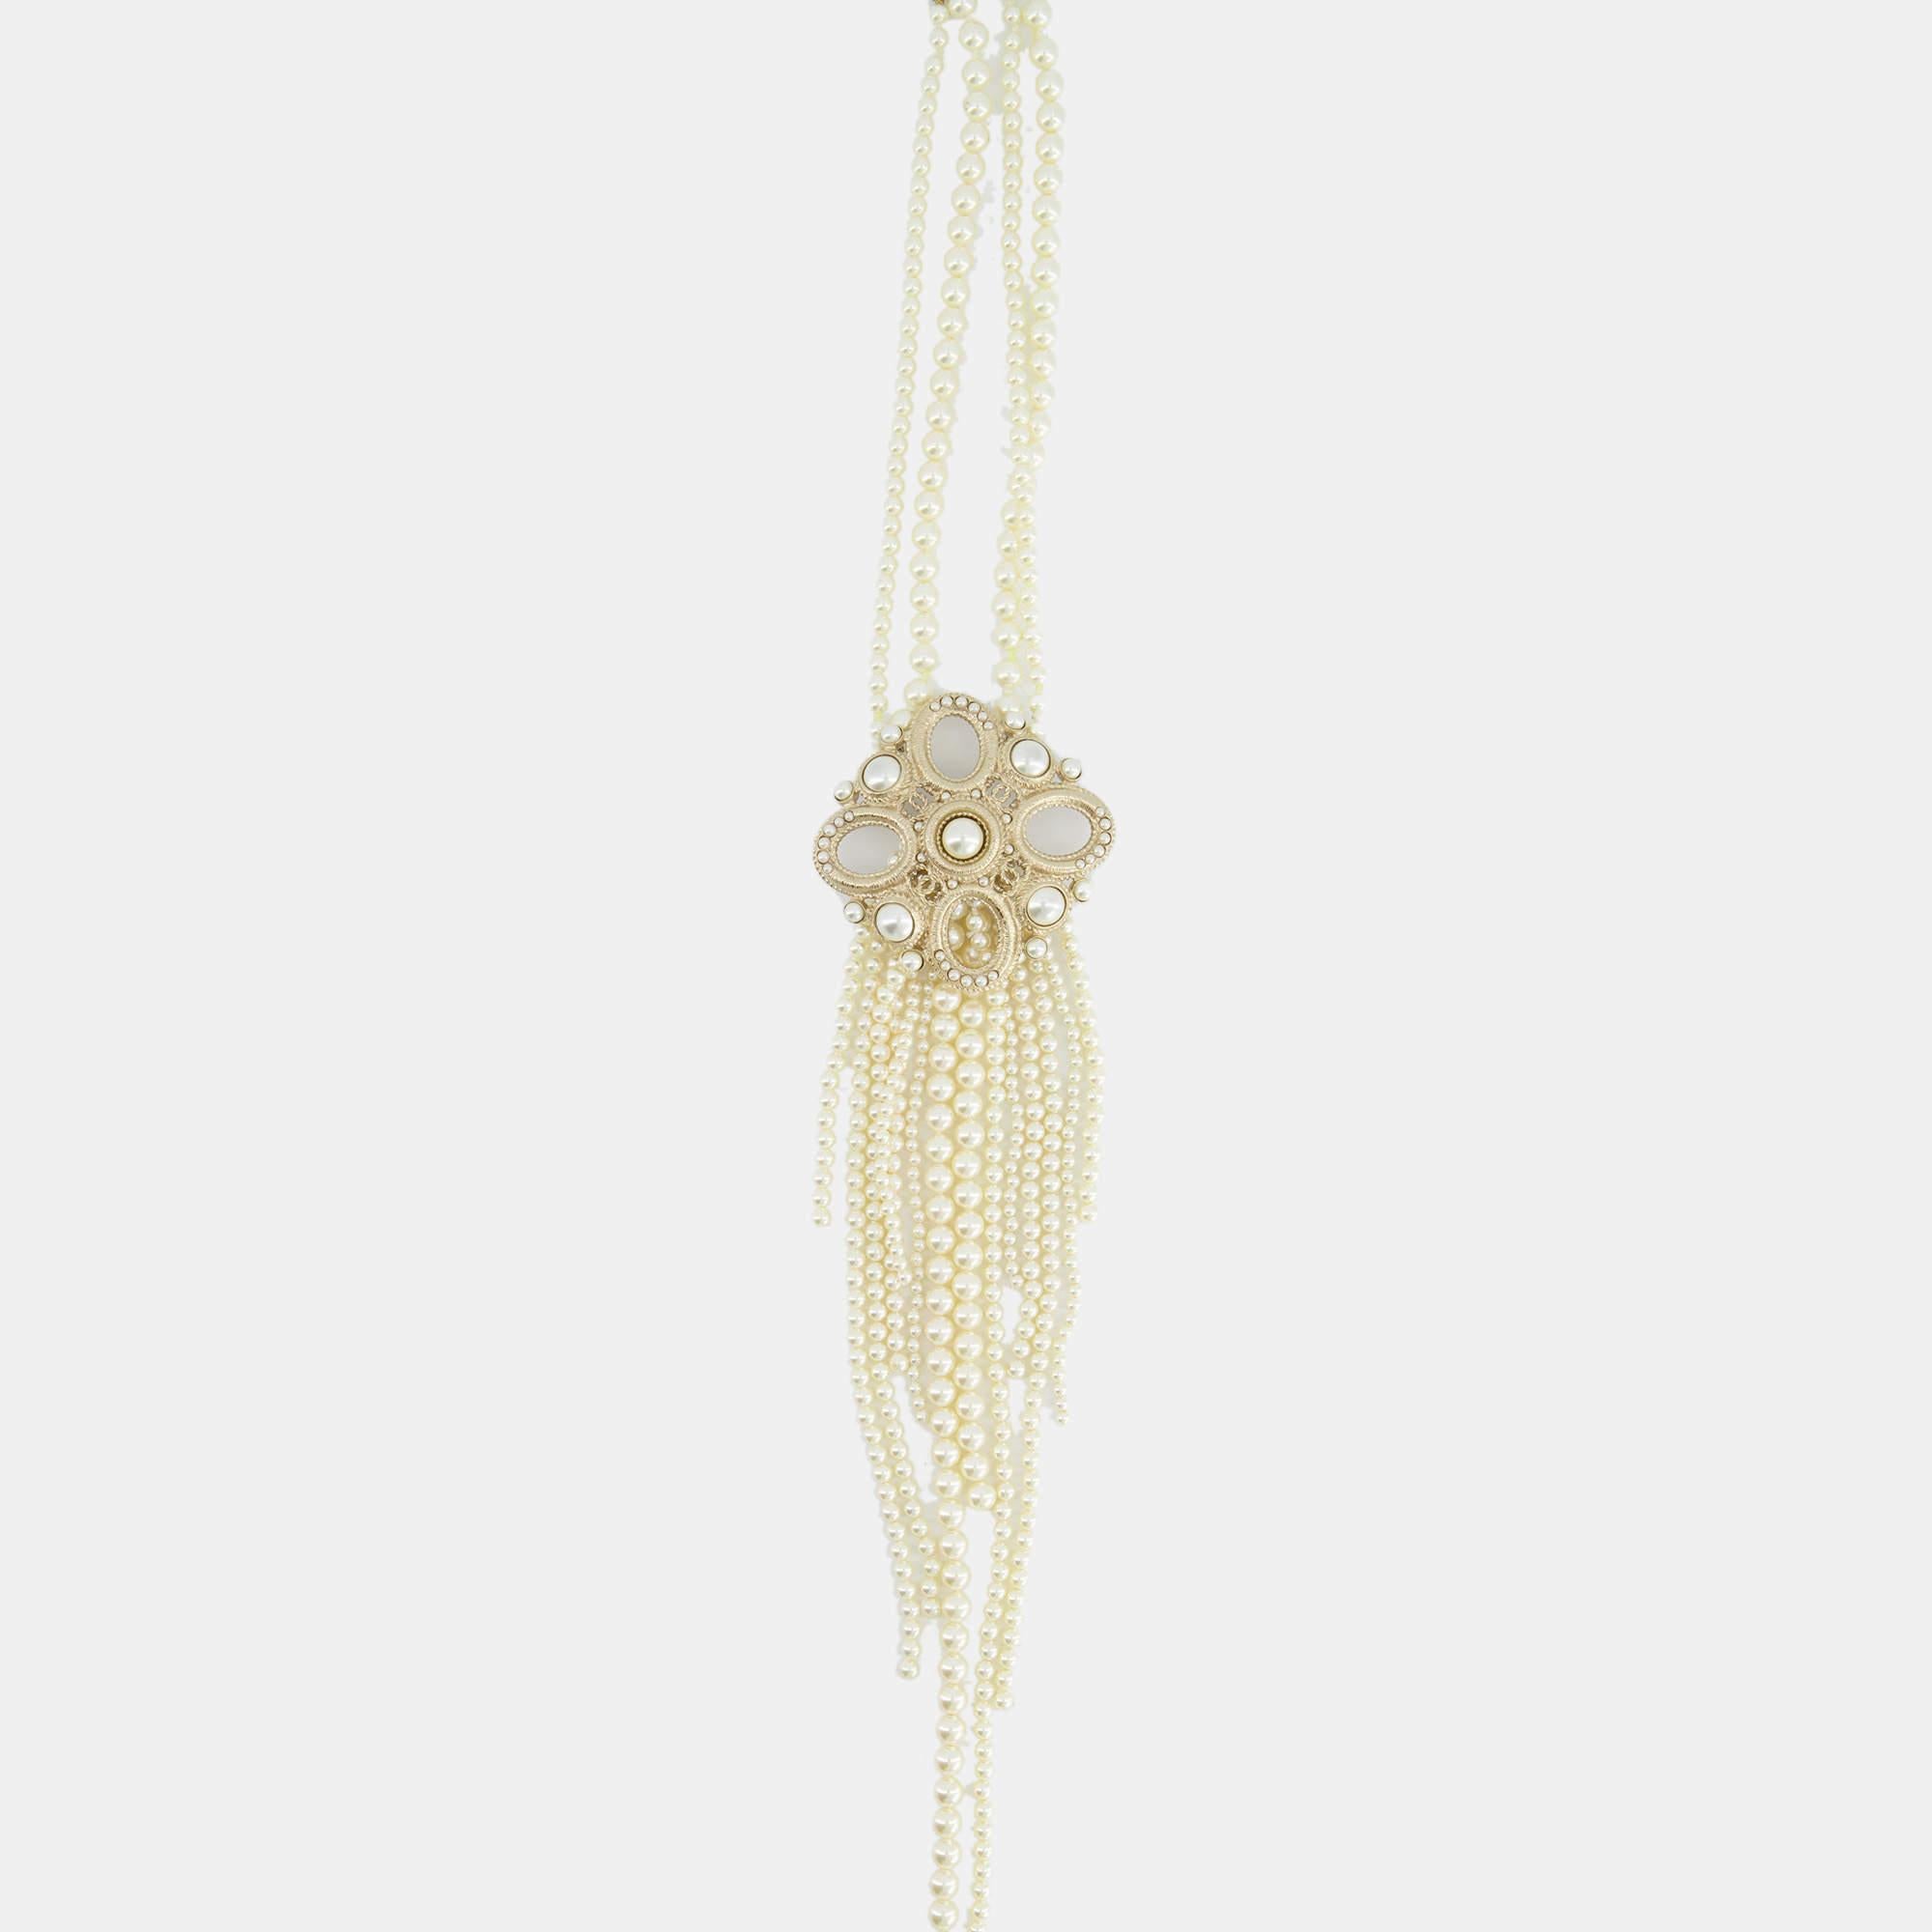 Chanel Choker Long Pearl Necklace with Antique Gold Pendant 1